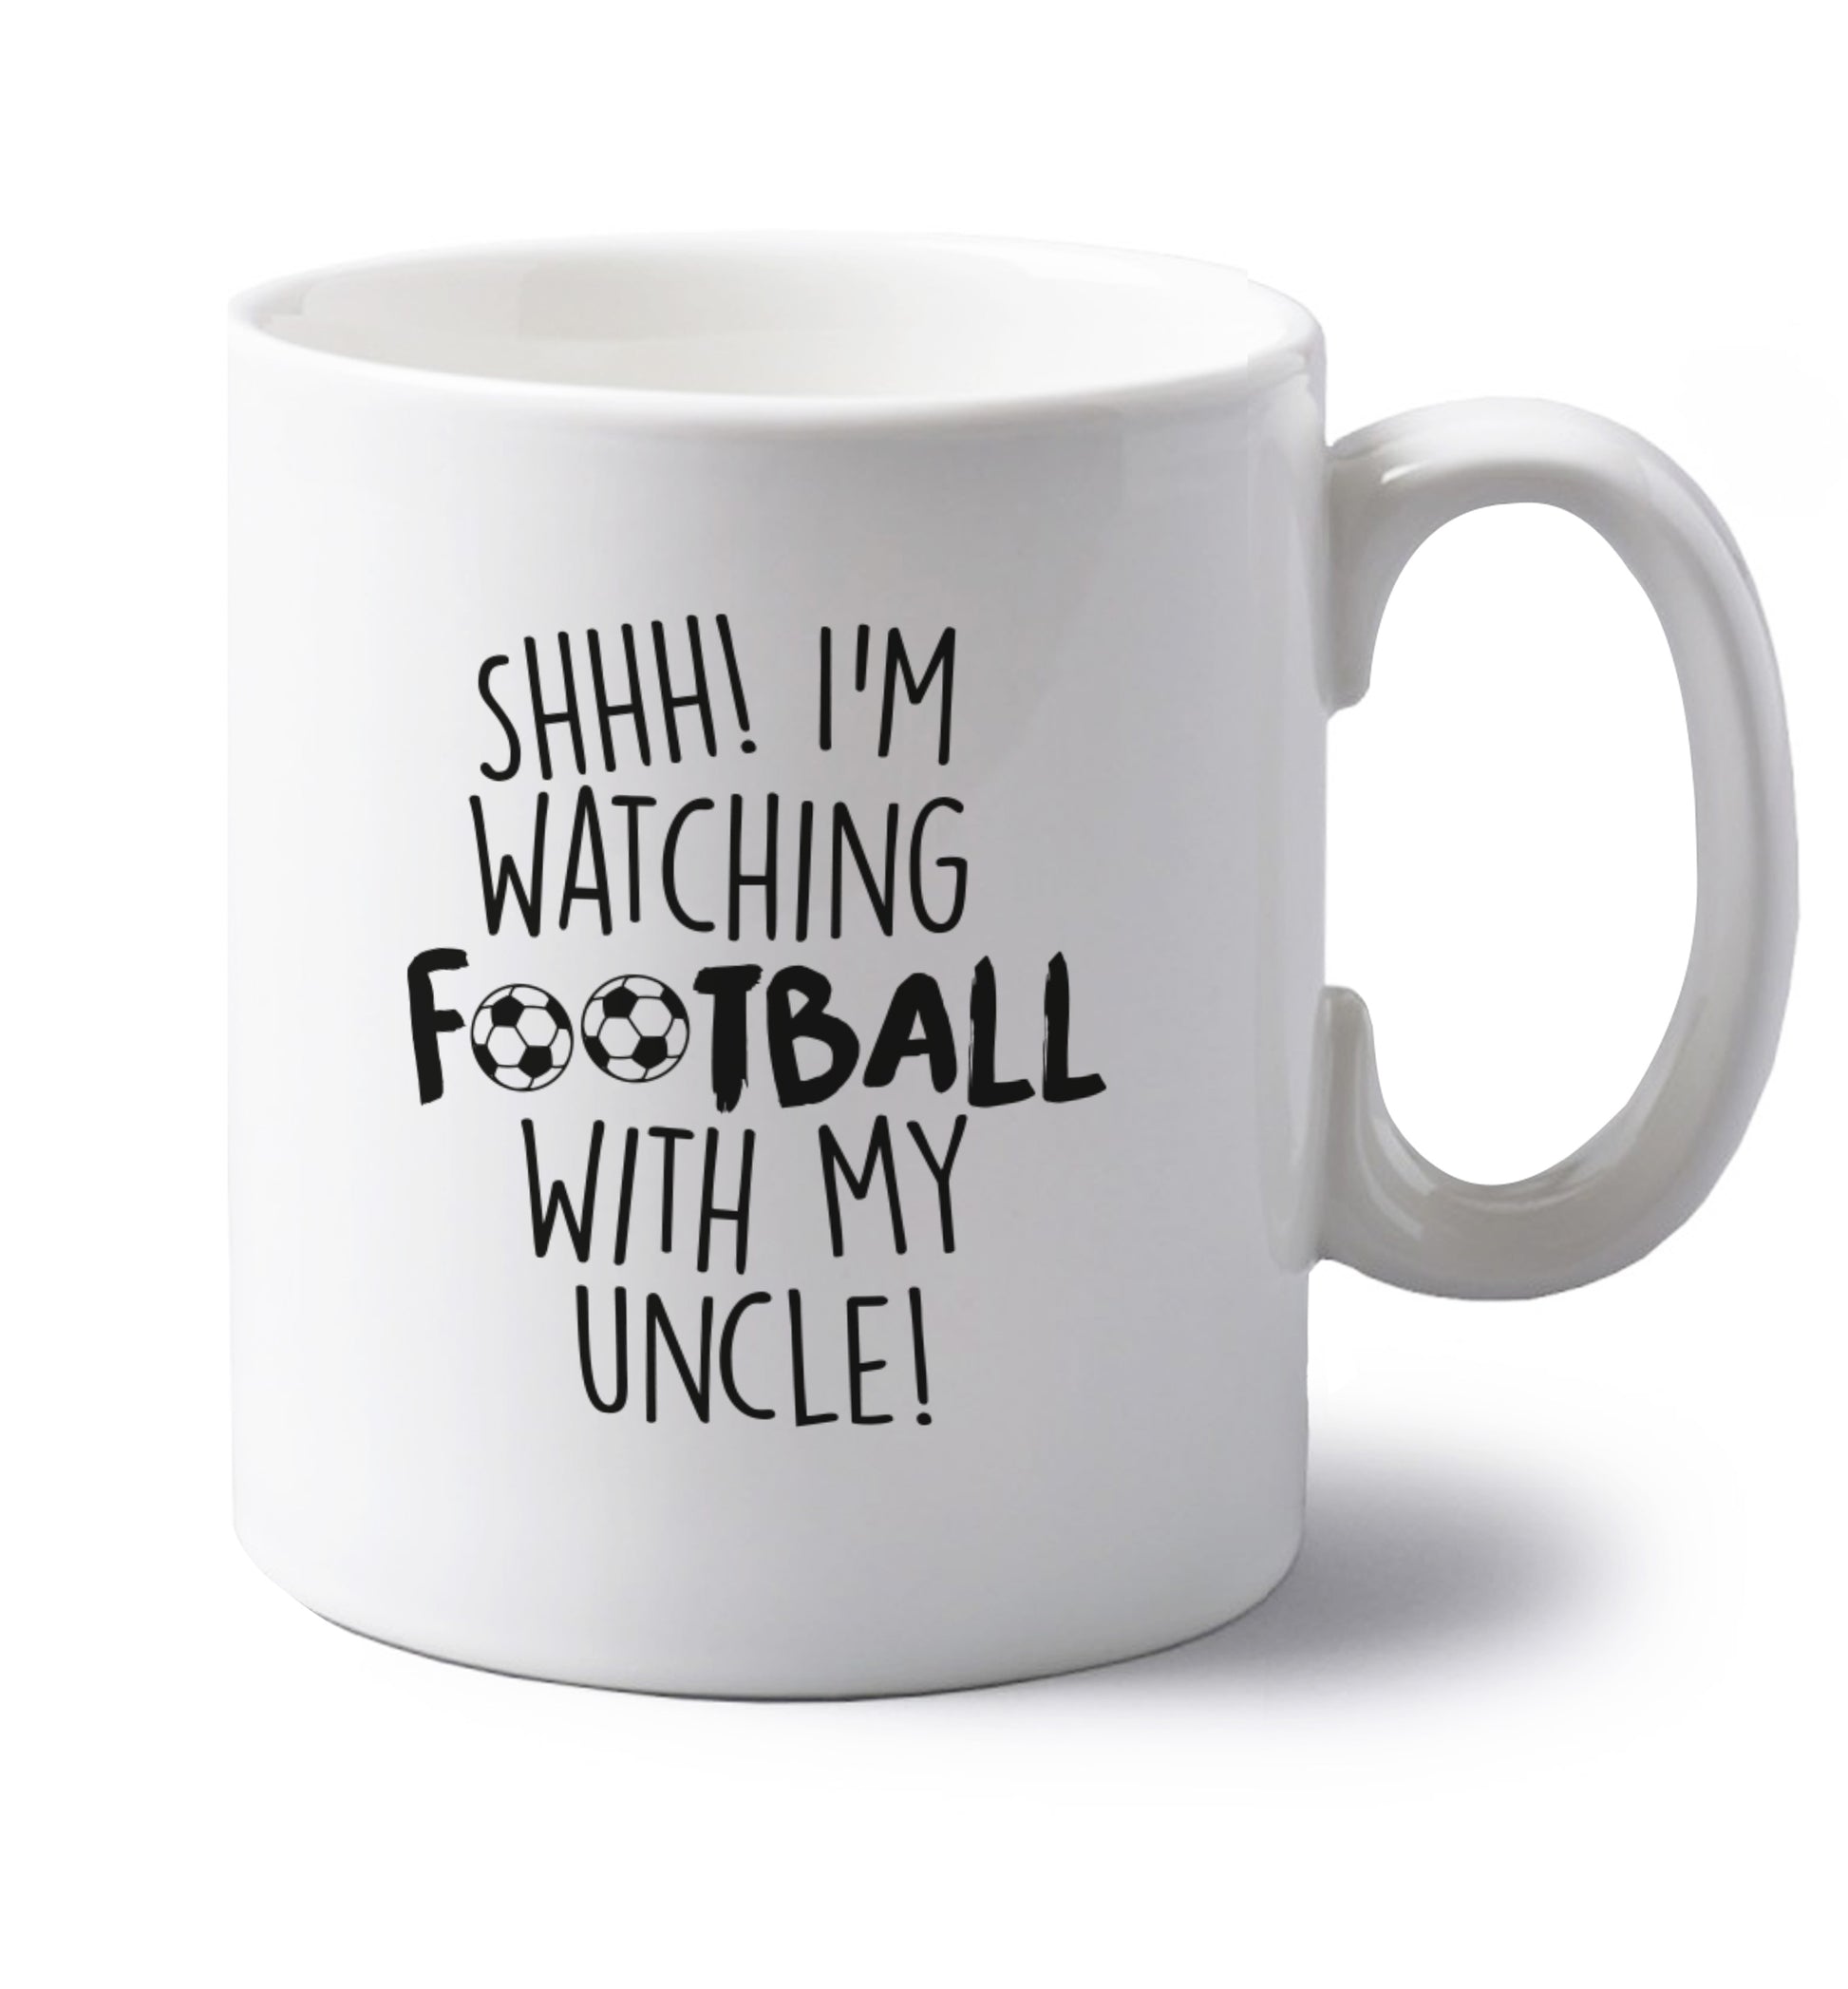 Shhh I'm watching football with my uncle left handed white ceramic mug 